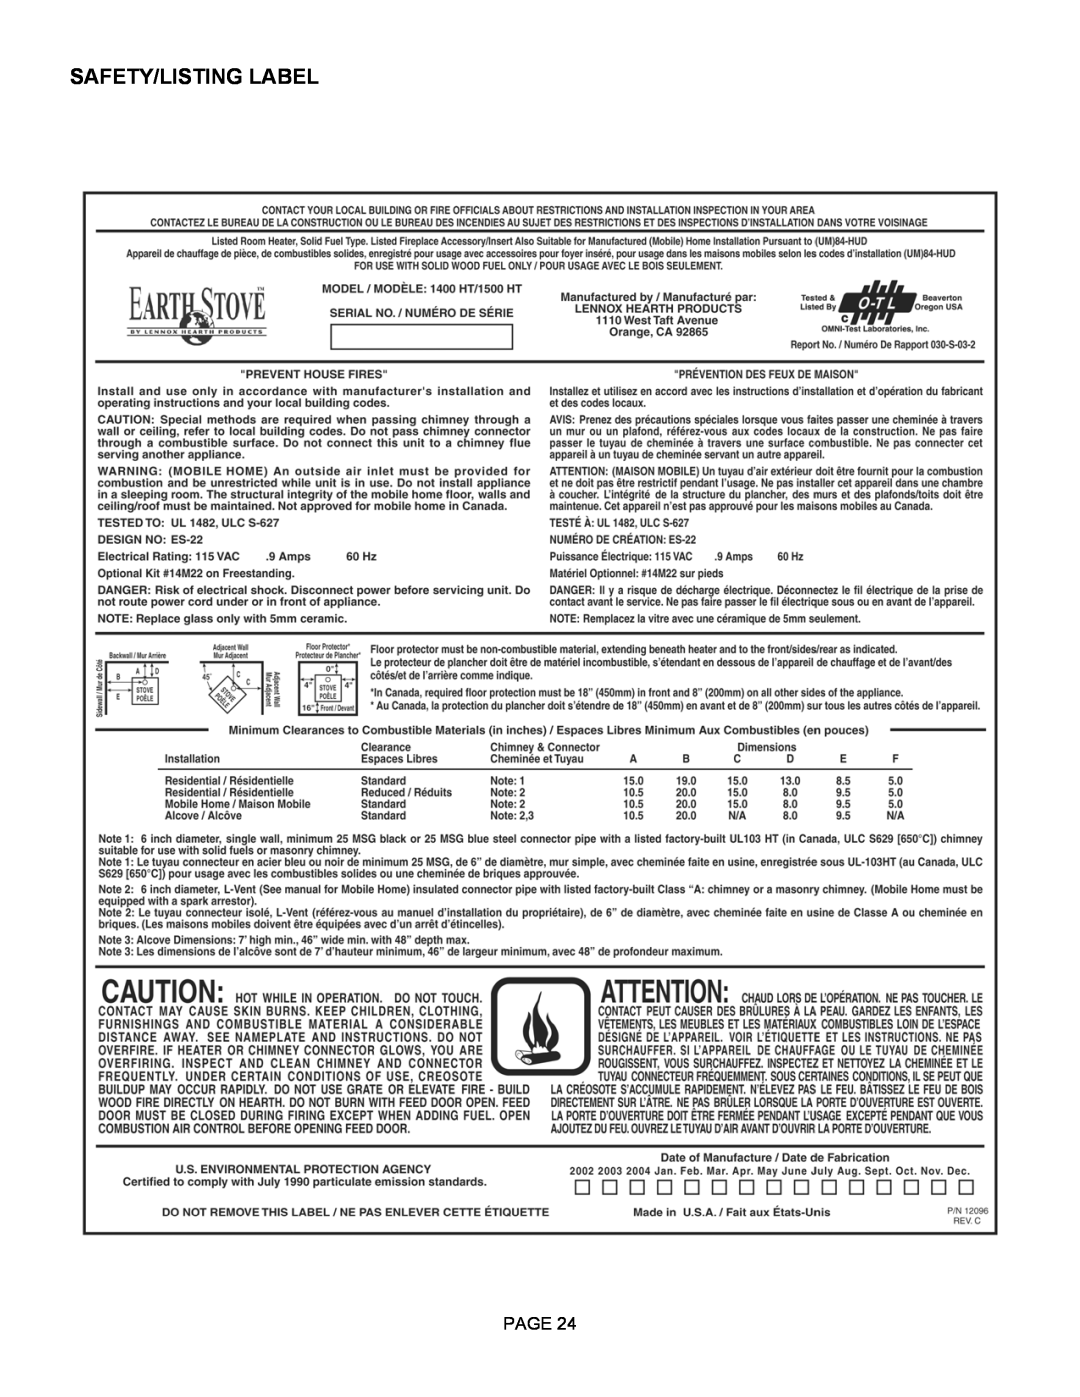 Milwaukee 1500HT operation manual Safety/Listing Label, Page 